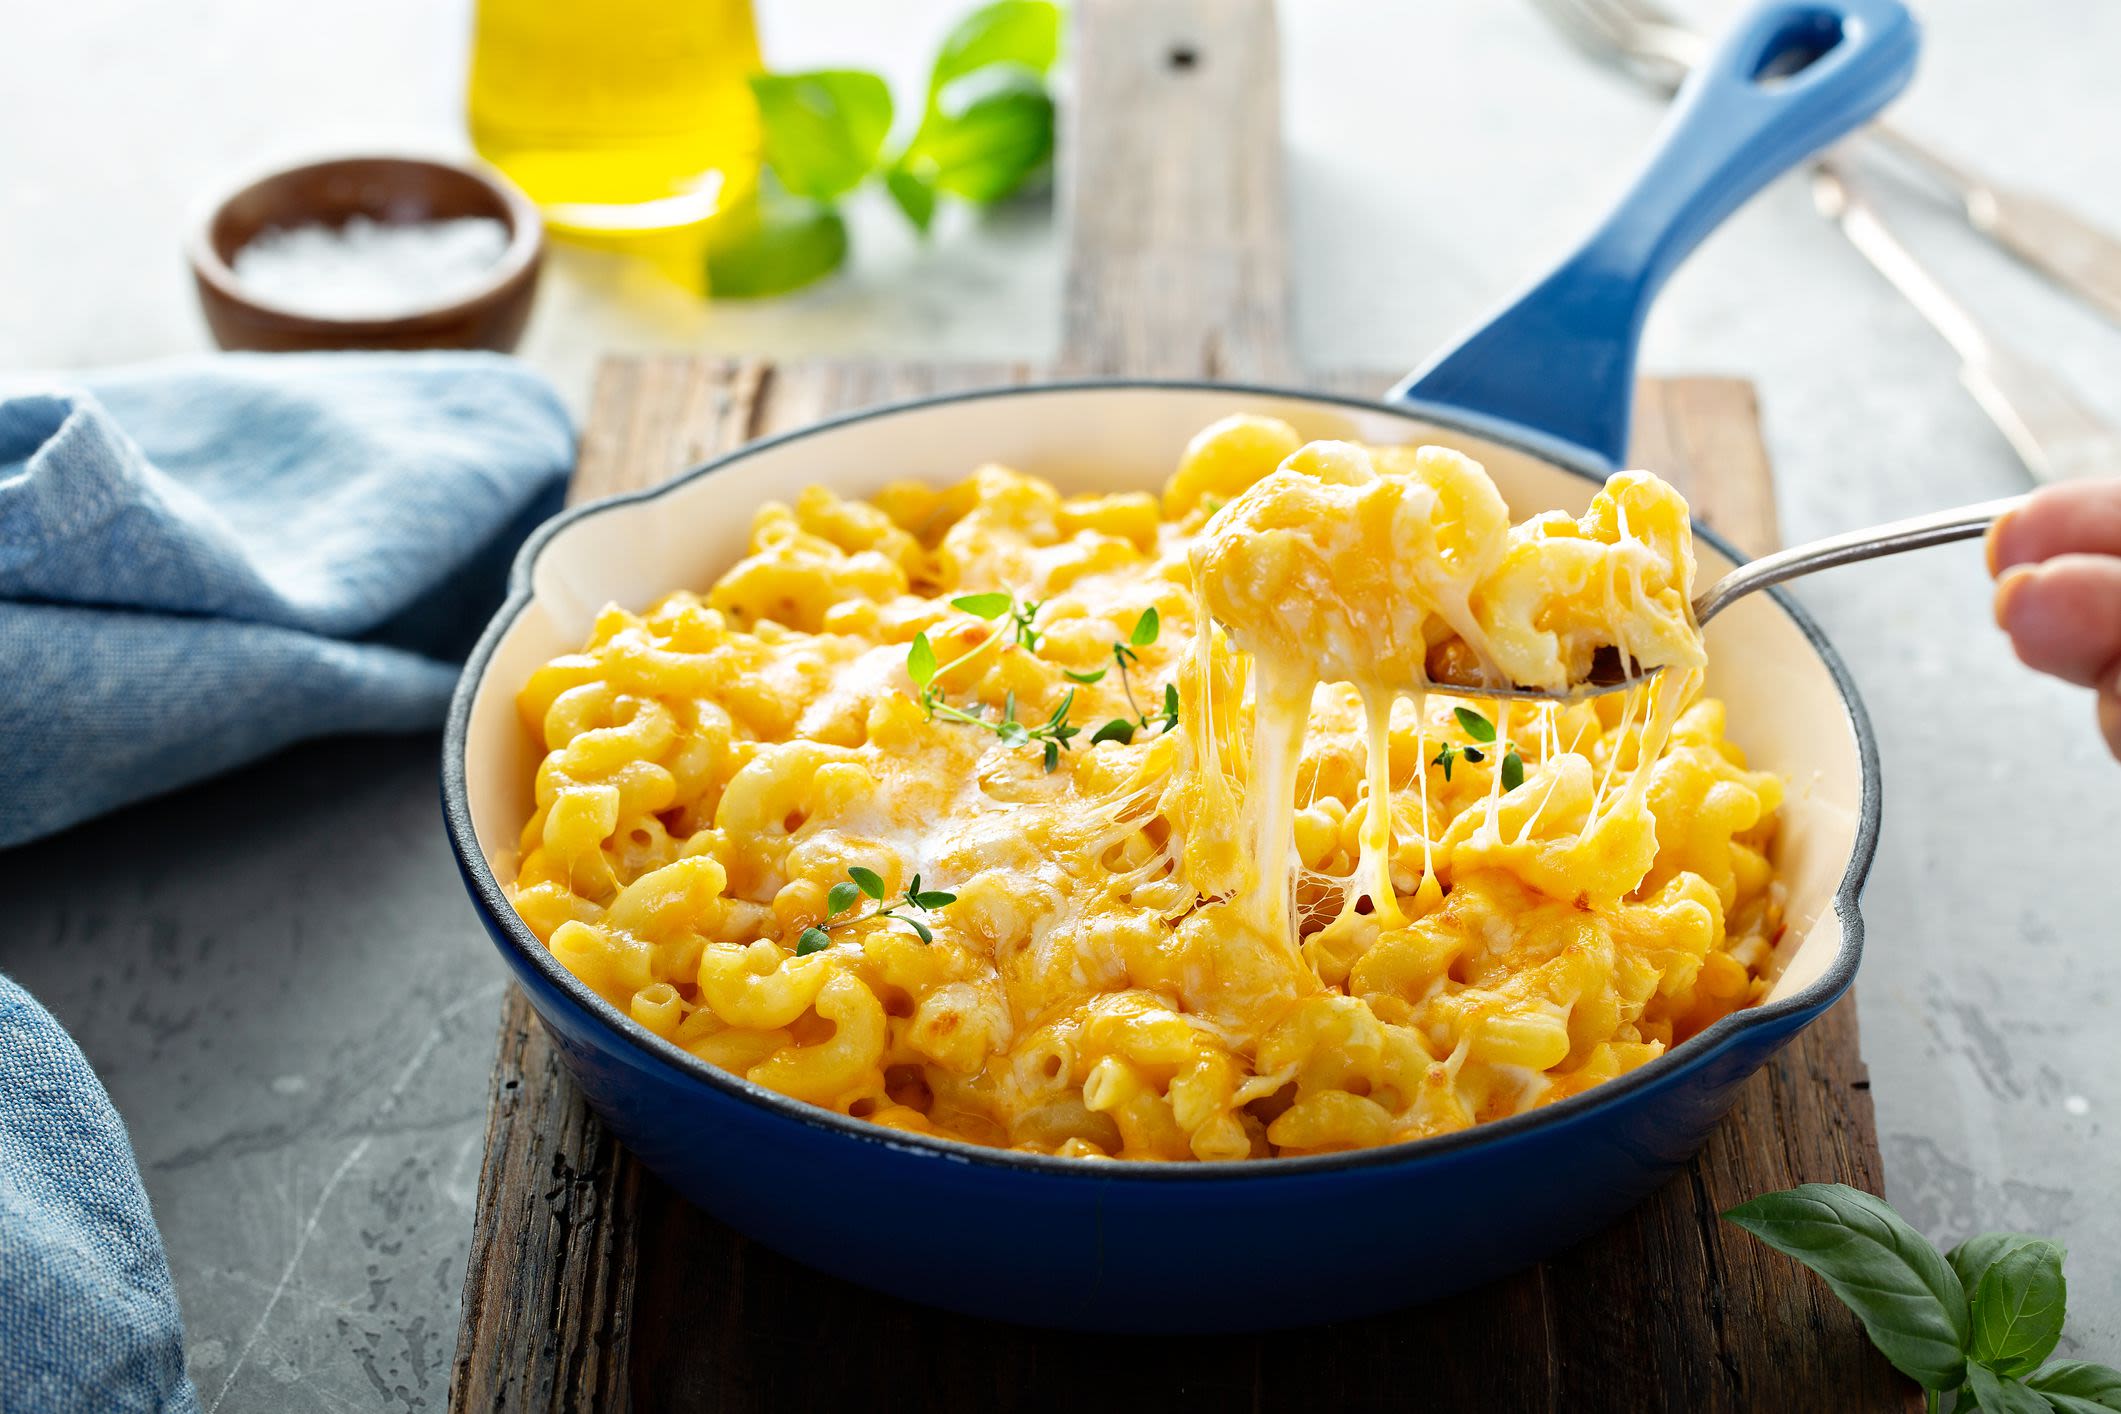 10 Viral Pasta Recipes That Are Totally Worth Your Time and Money